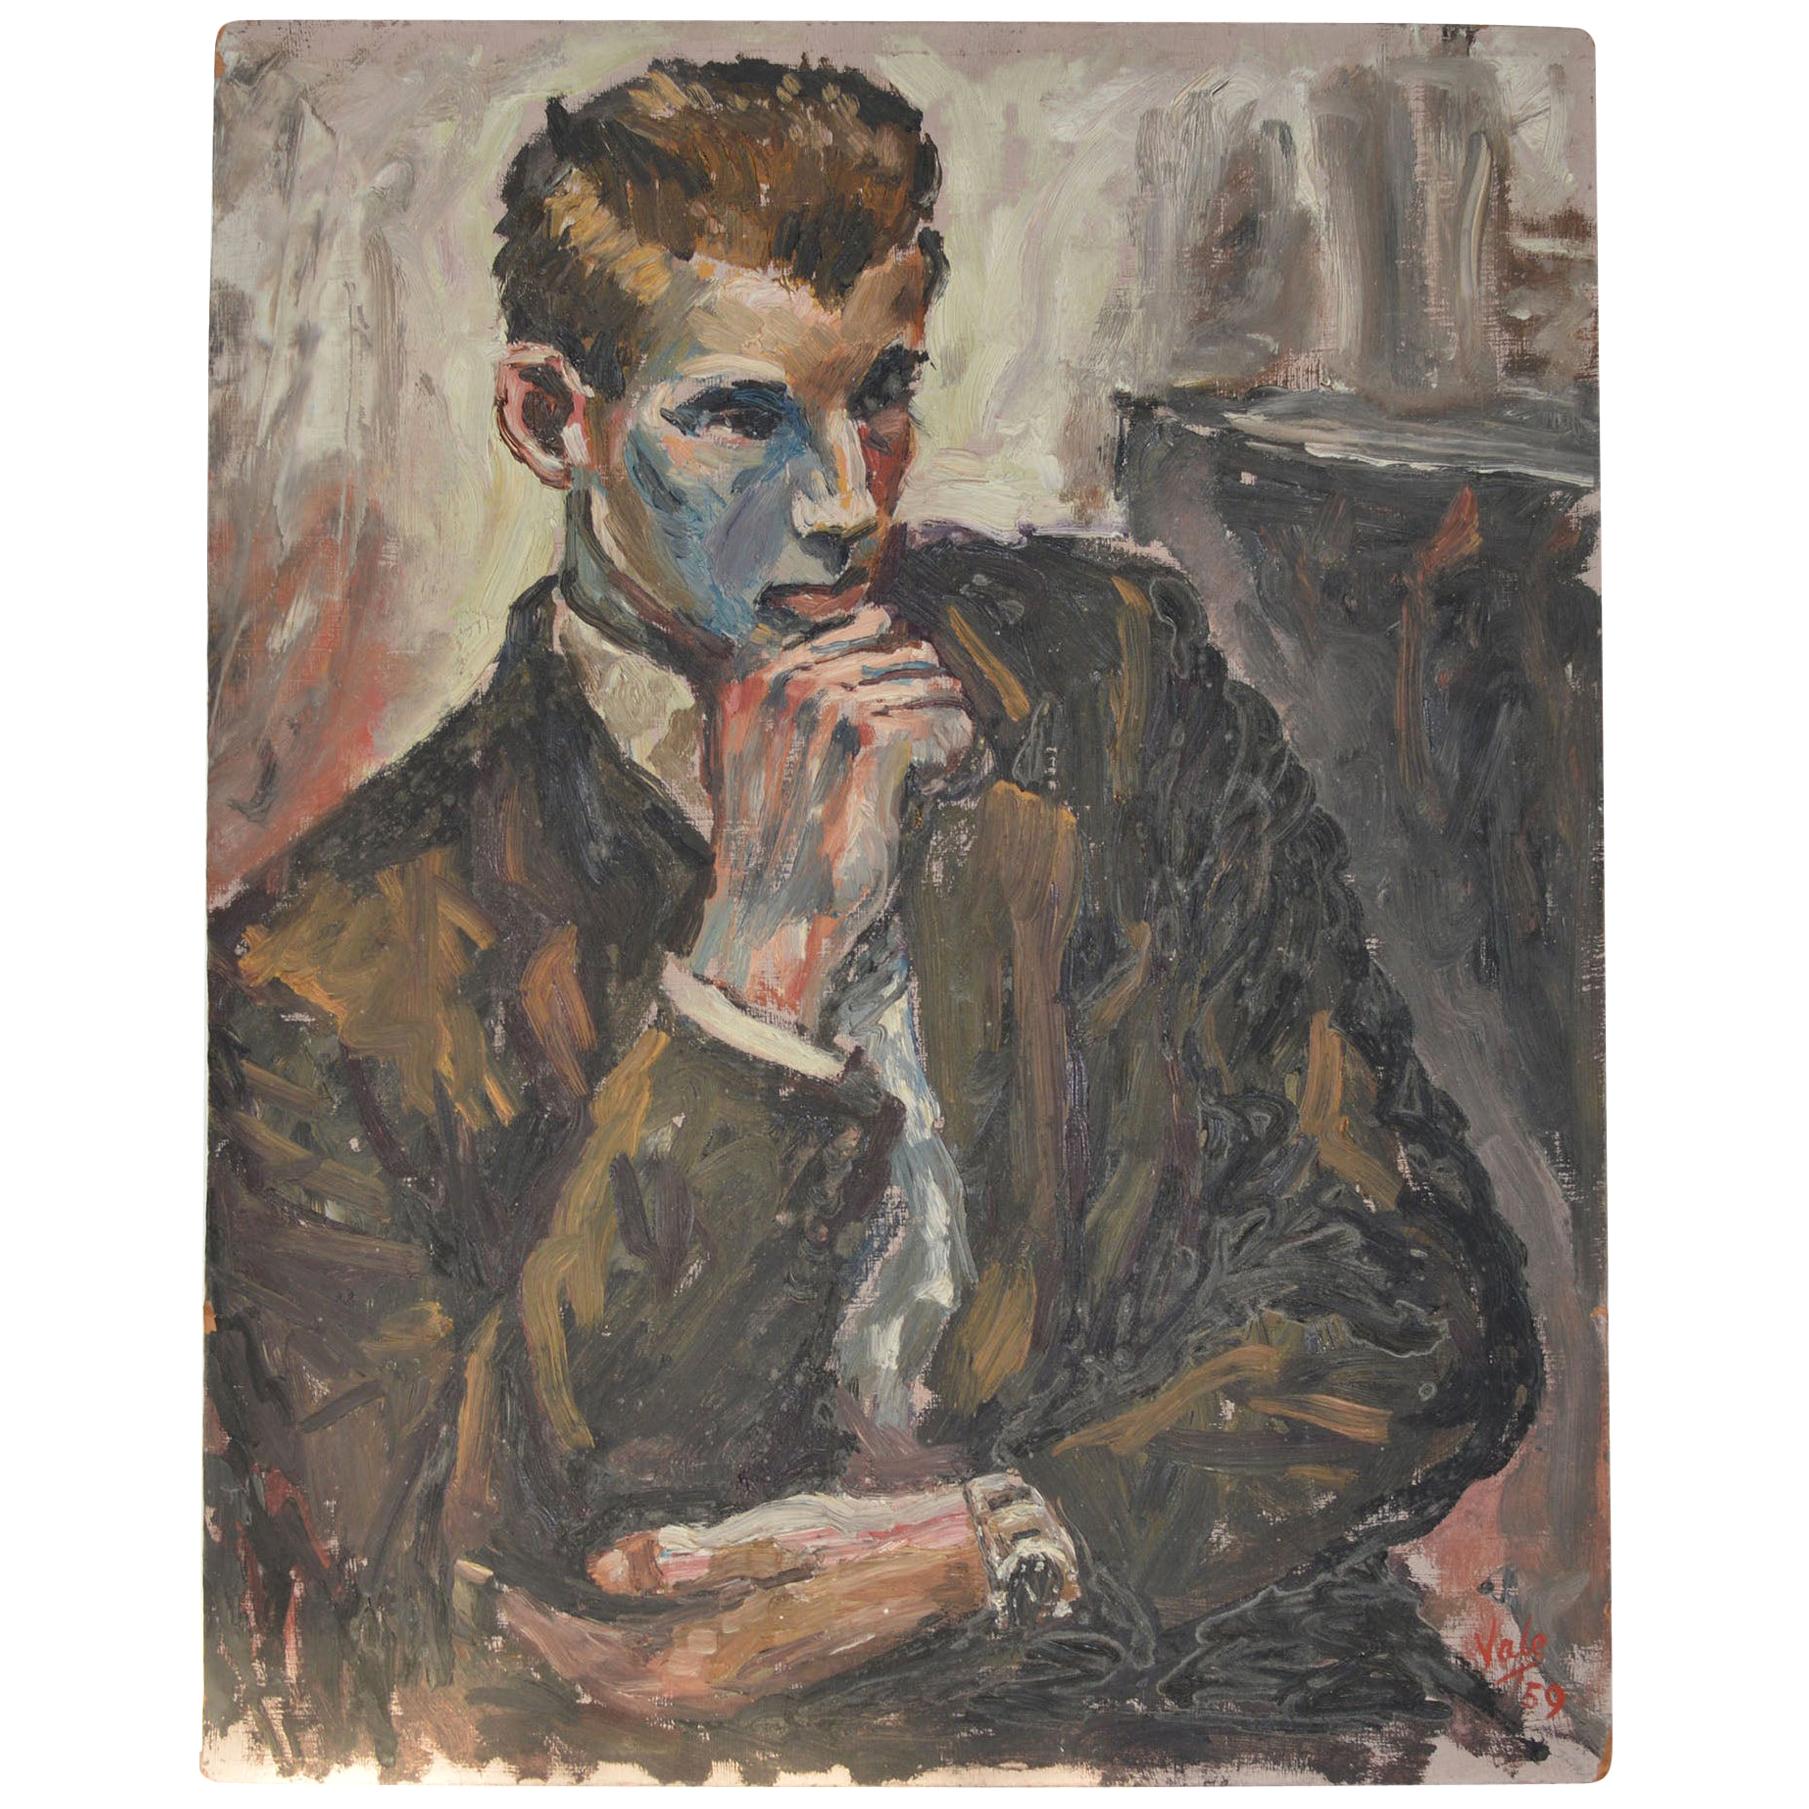 Portrait of a Young Man, Brian Vale, 1959